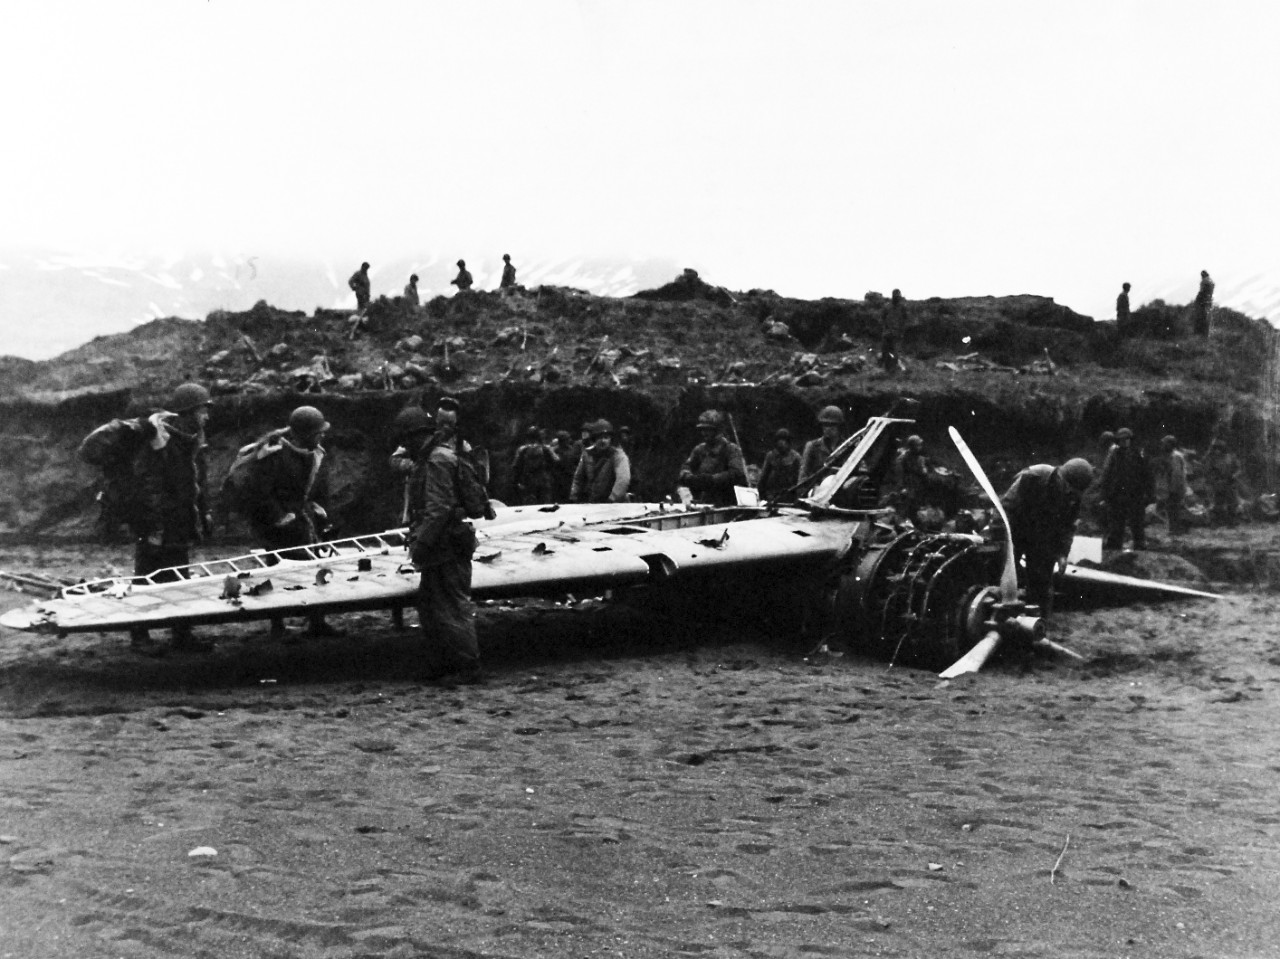 80-G-54503: Aleutian Islands Campaign, June 1942 - August 1943.  Battle for Attu, May 1943.    American soldiers landing at Holtz Bay find a Japanese victim of Army Air Corps marksmanship.  This float-type Zero had been machine-gunned several days before the landing by attacking U.S. planes.  The Japanese pulled the damaged ship ashore and turned it over on its back.  U.S. troops in the landing party survey the craft.   Photograph, May 11, 1943.   Official U.S. Navy photograph, now in the collections of the National Archives.   (2016/07/19).